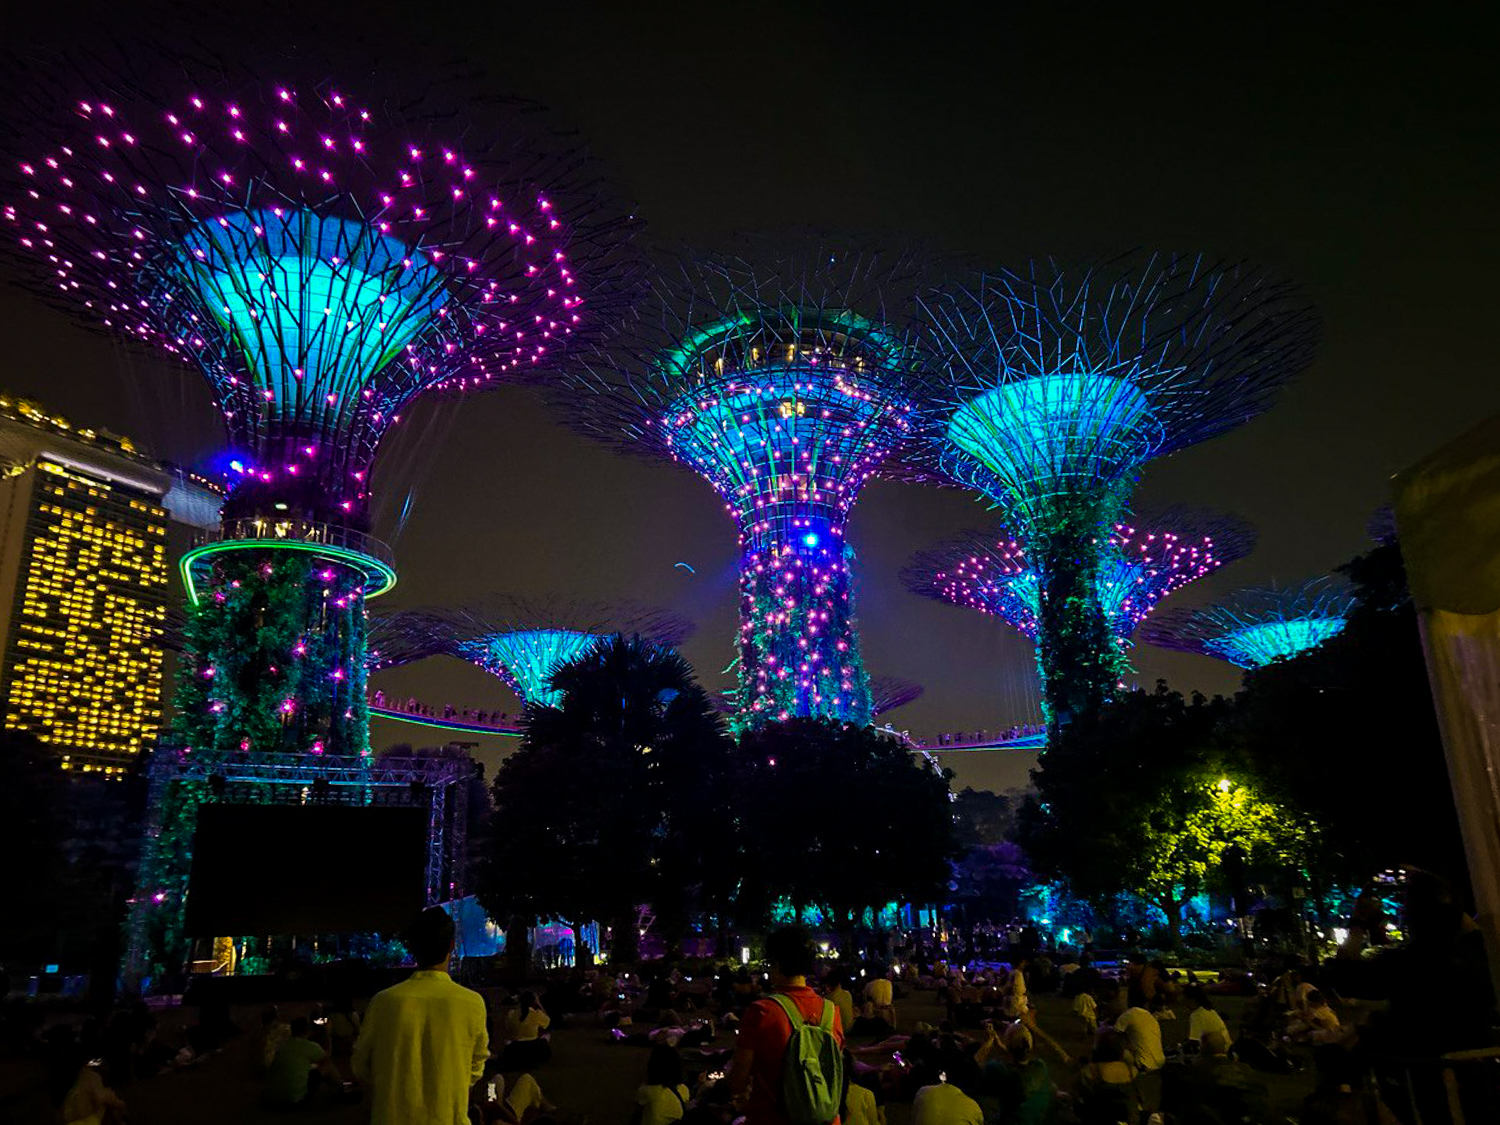 singapore trip for 3 persons